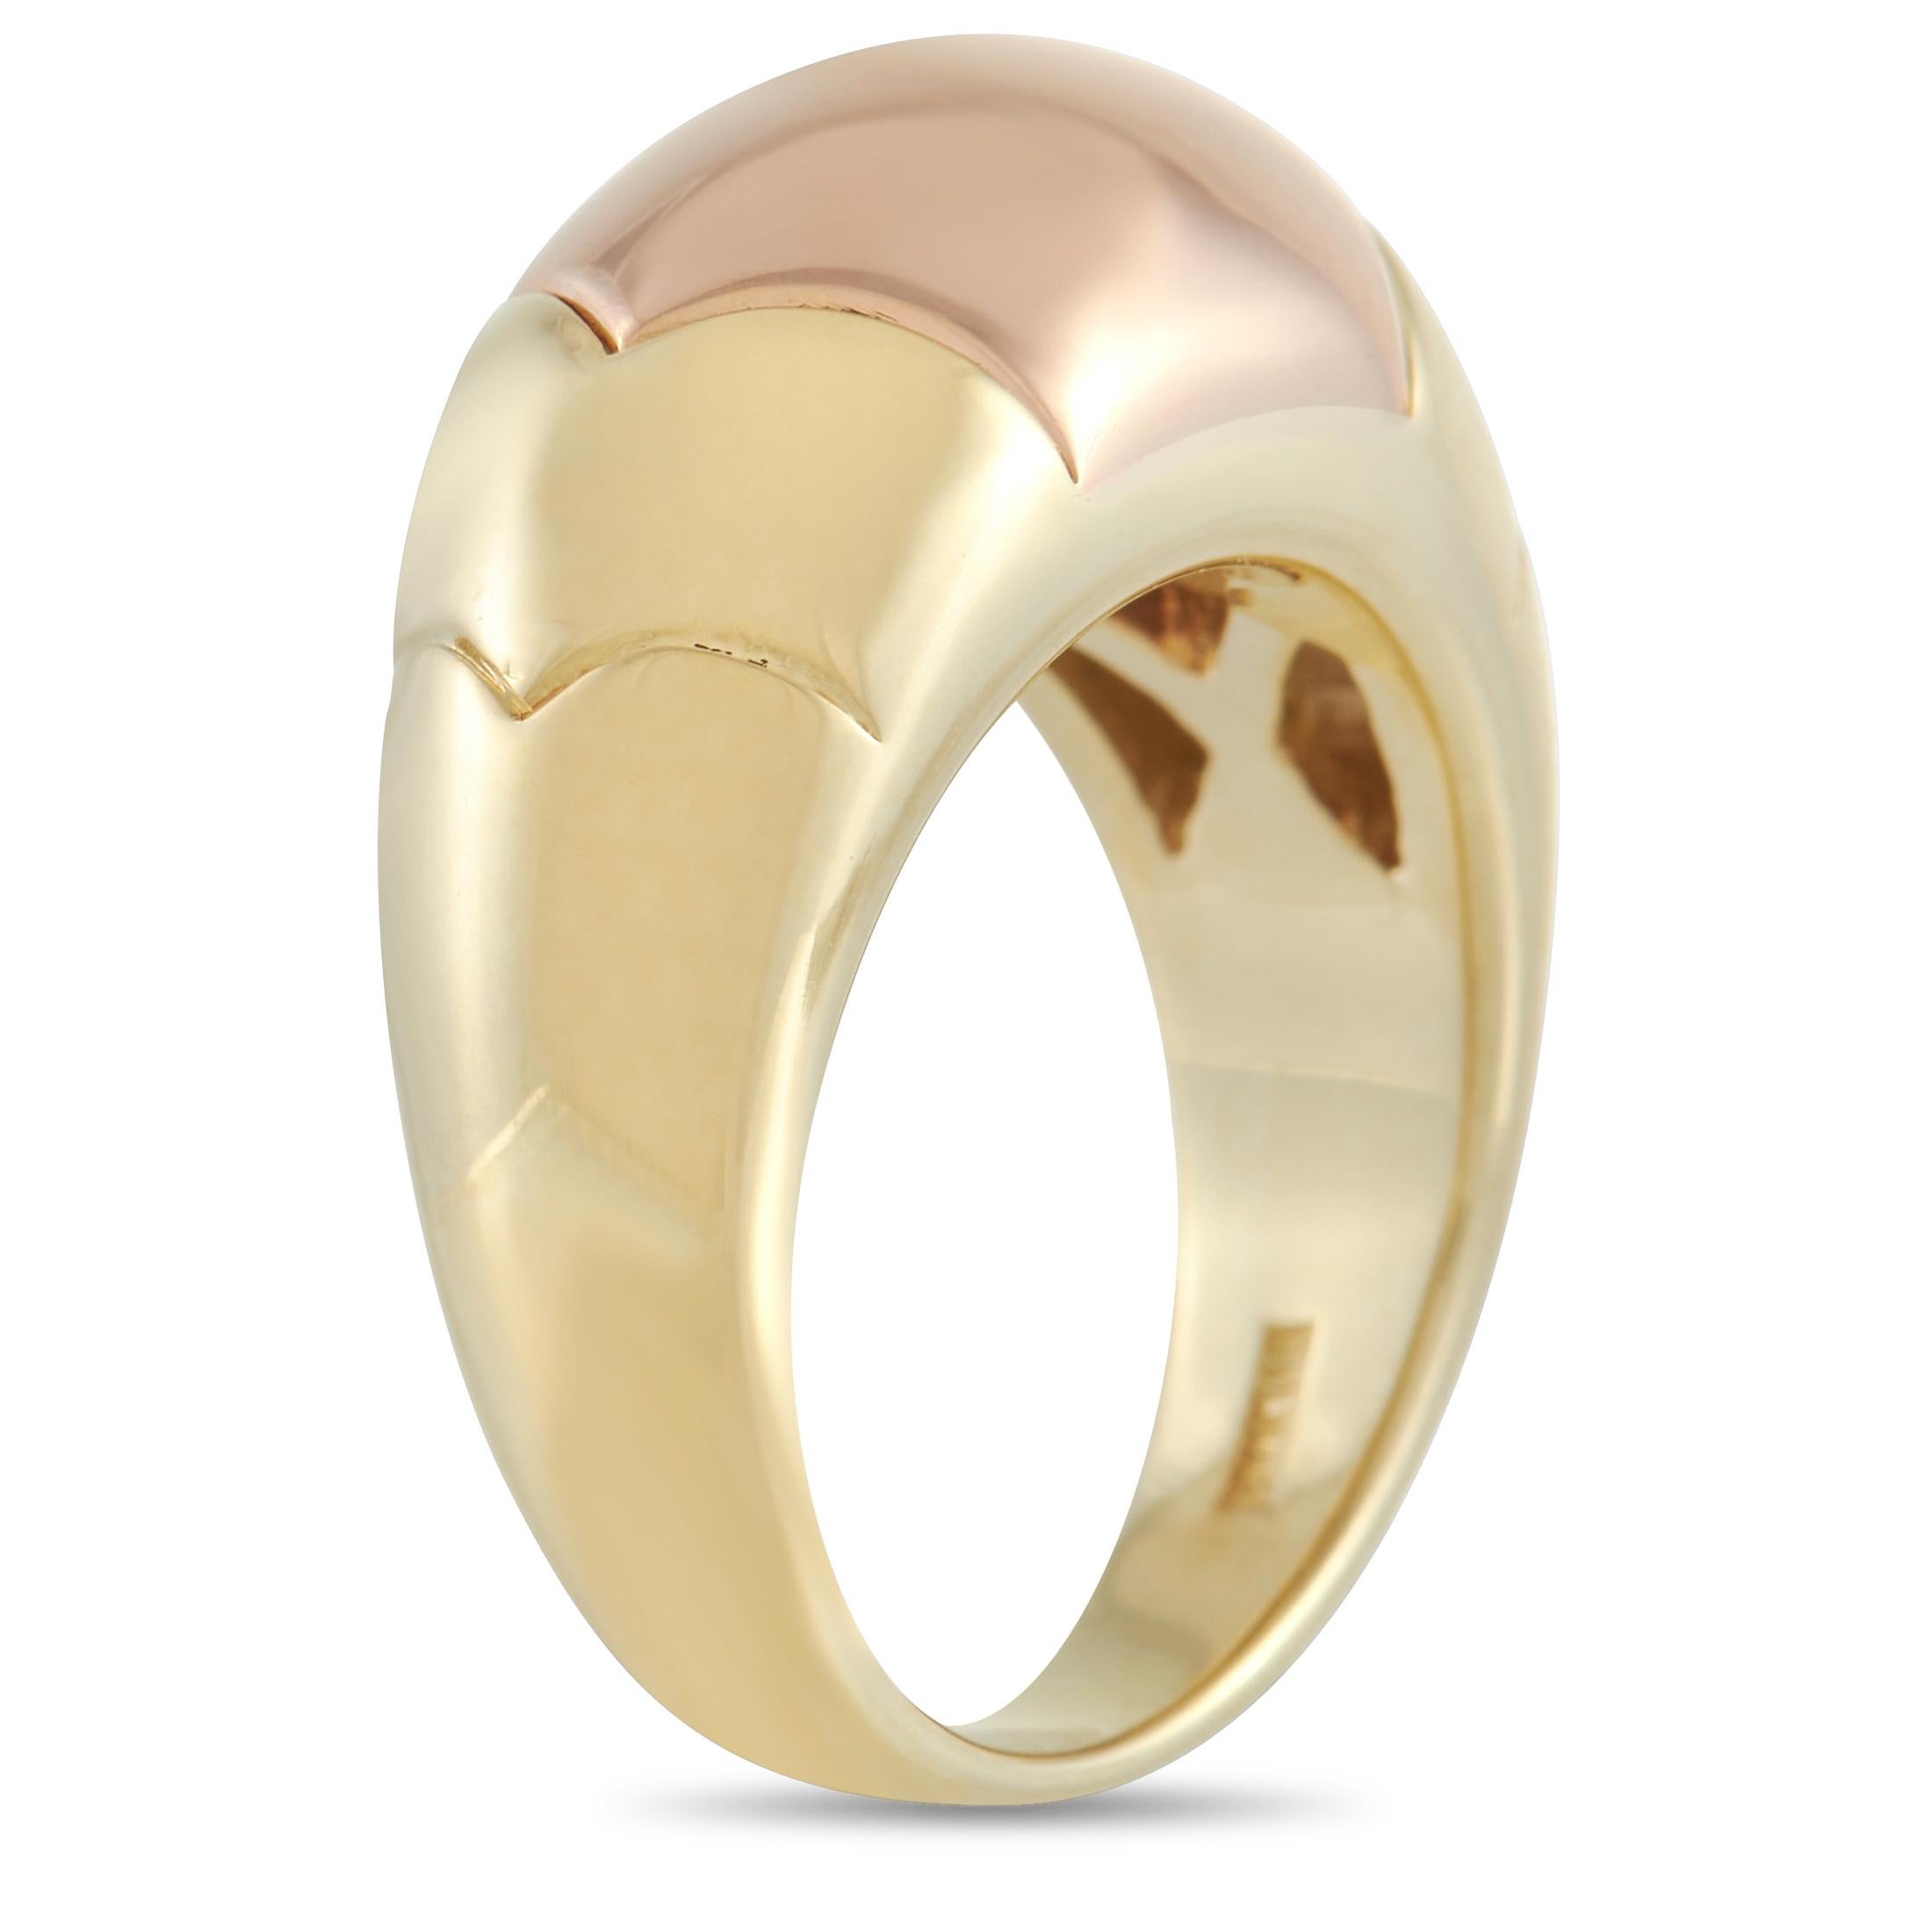 This Bvlgari Tronchetto proves that a luxury piece doesn’t need glittering gemstones to make a stylish statement. This two-toned ring features a 4mm wide band crafted from opulent 18K yellow gold. At the center, you’ll find a chic 18K rose gold